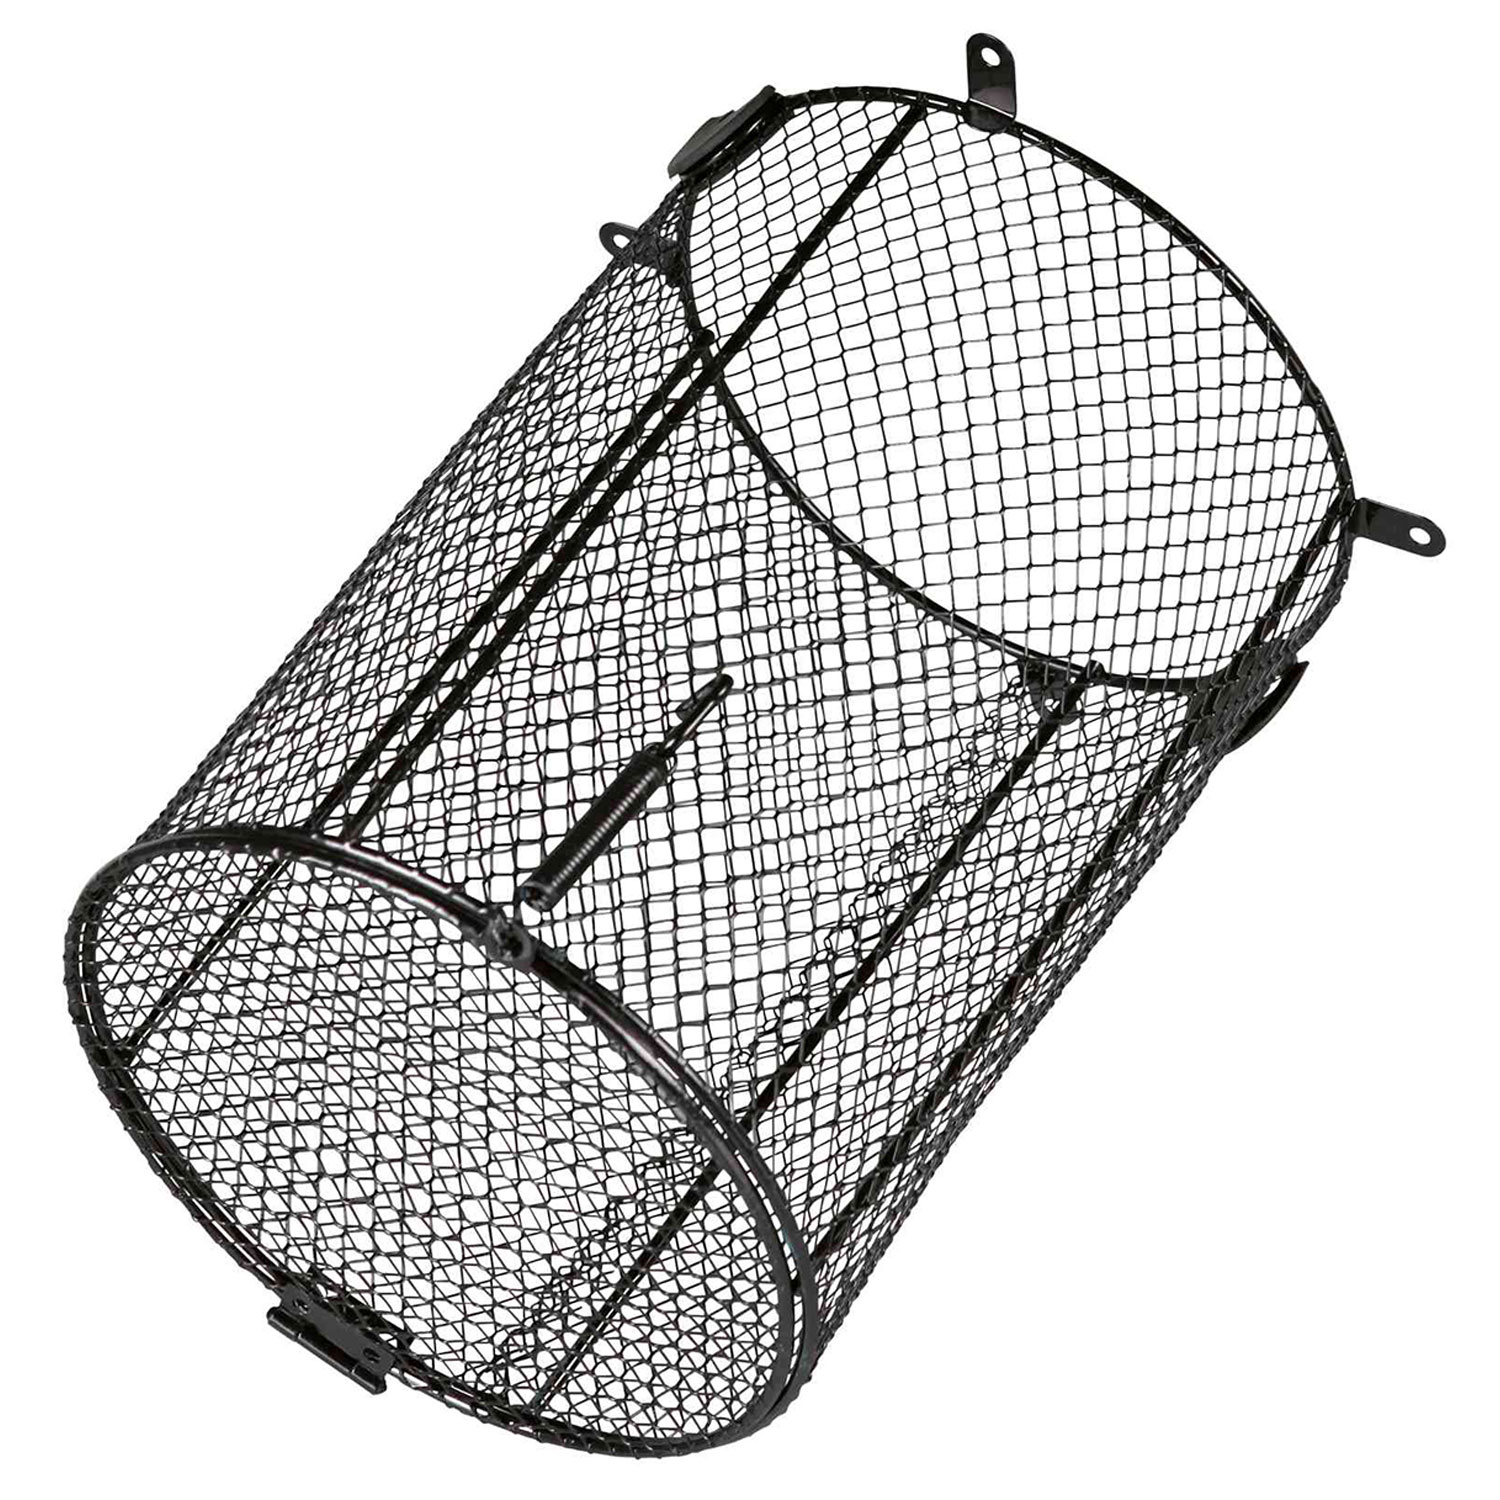 Merg Toevlucht doden Protective cage for terrarium lamps, ø 12 × 16 cm - TRIXIE